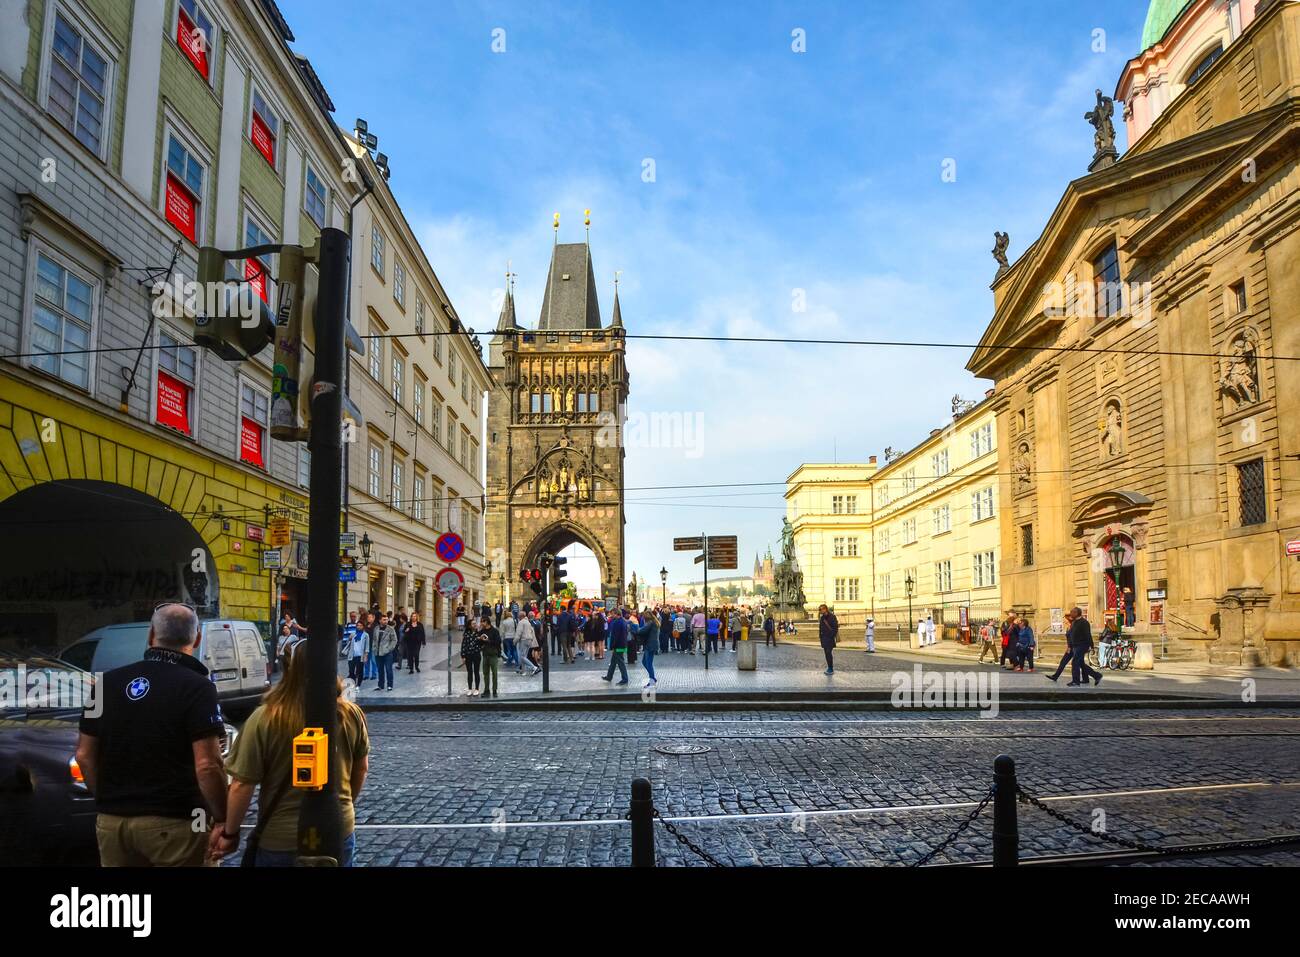 Pedestrians prepare to cross the street towards Knights of the Cross Square with the Old Town Tower and St Vitus Cathedral in view in Prague Czechia. Stock Photo